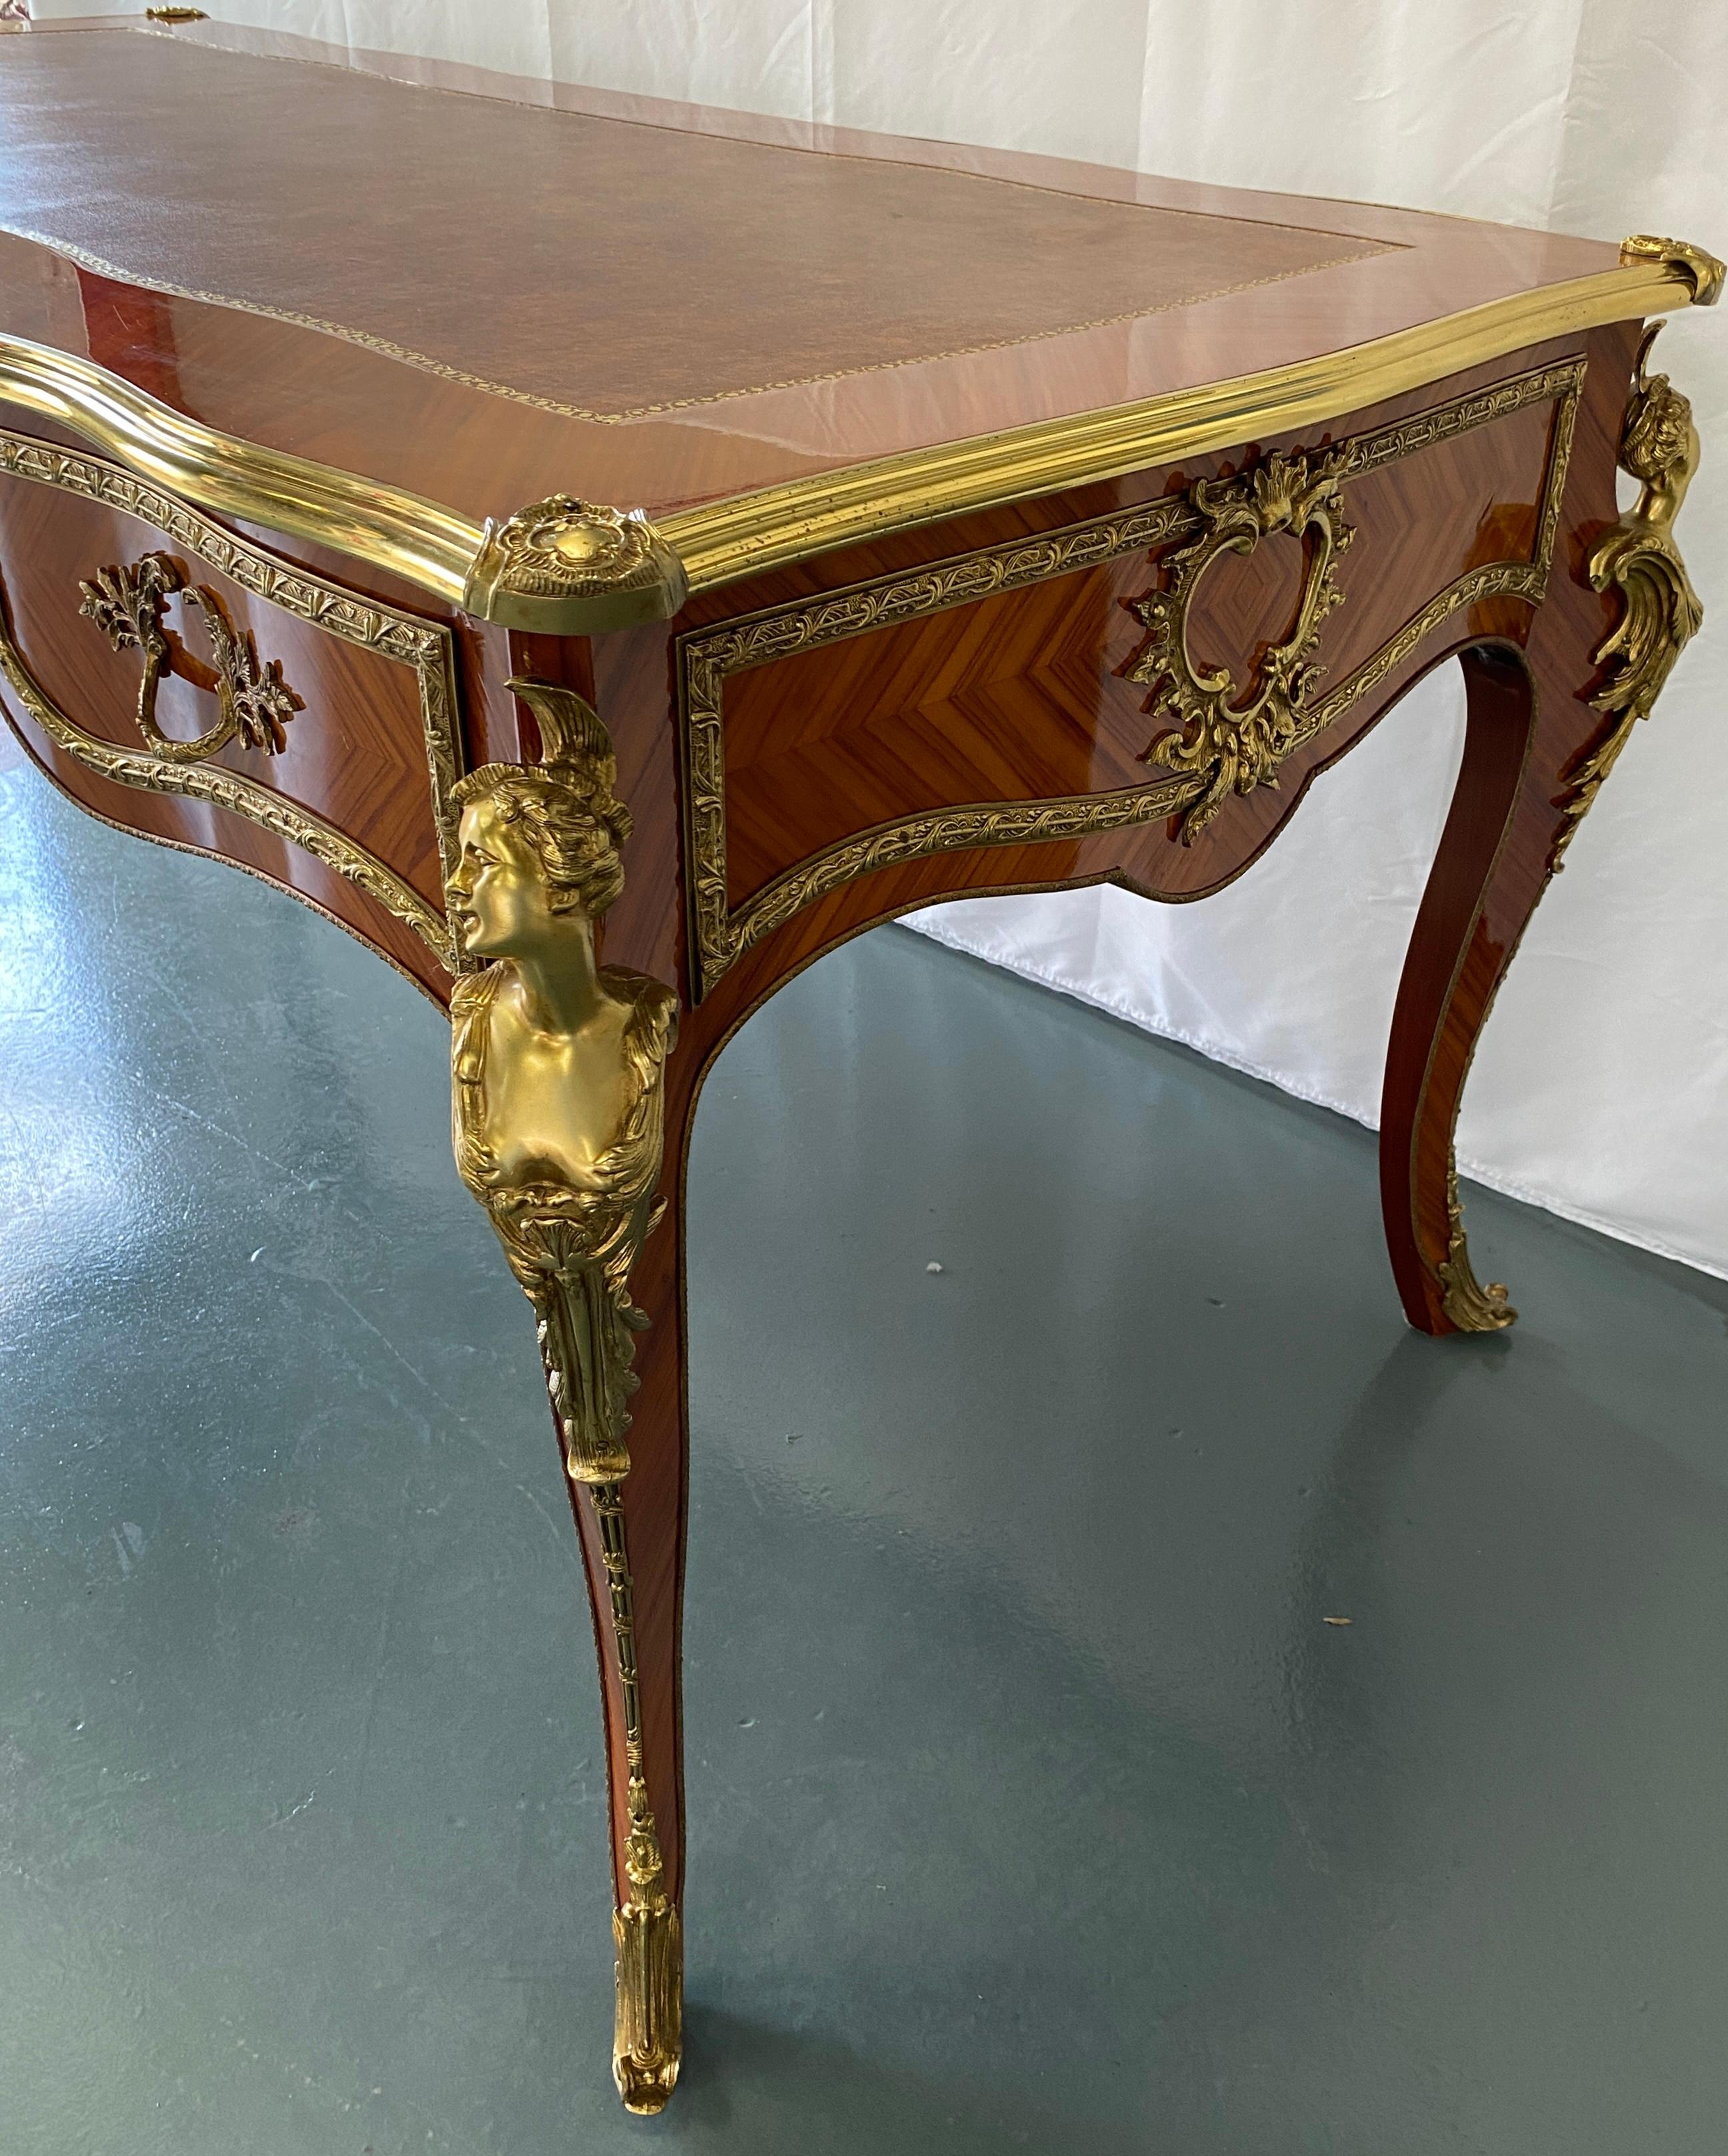 French Louis XV Style Bureau Plat with Ormolu Mounts French Flat Desk For Sale 6